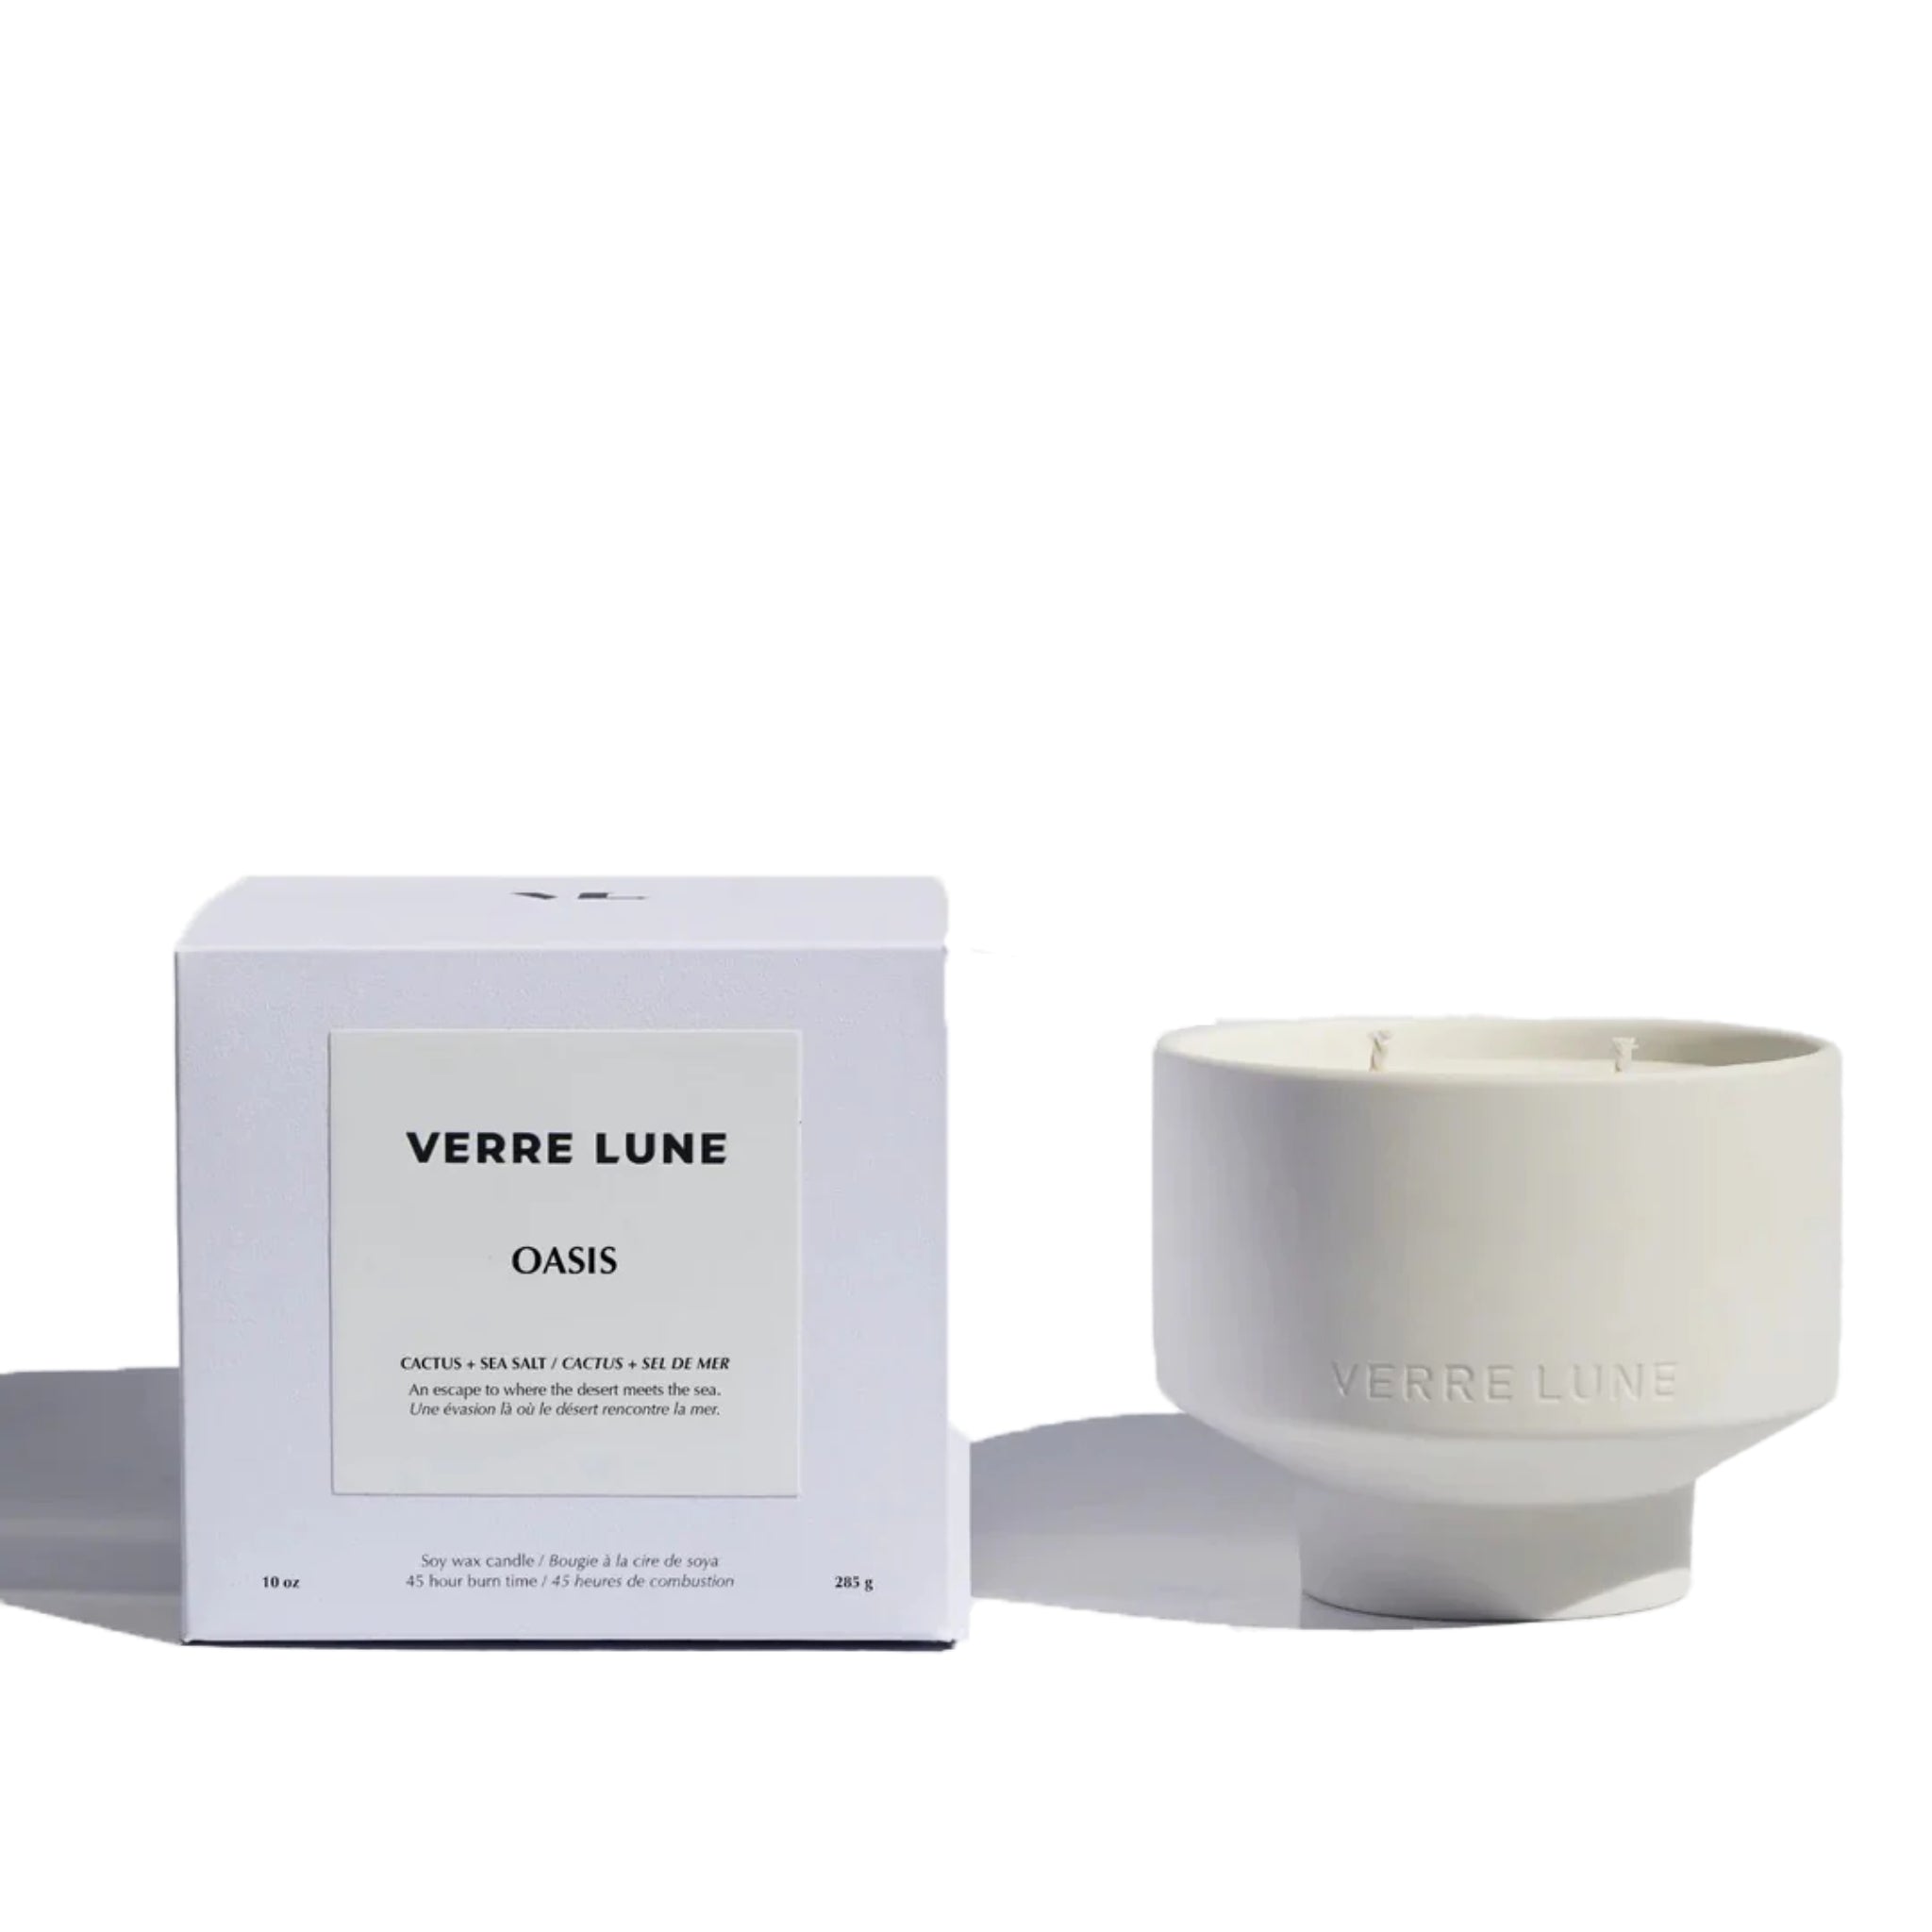 Verre lune oasis candle (right) and its packaging (left) on a white background